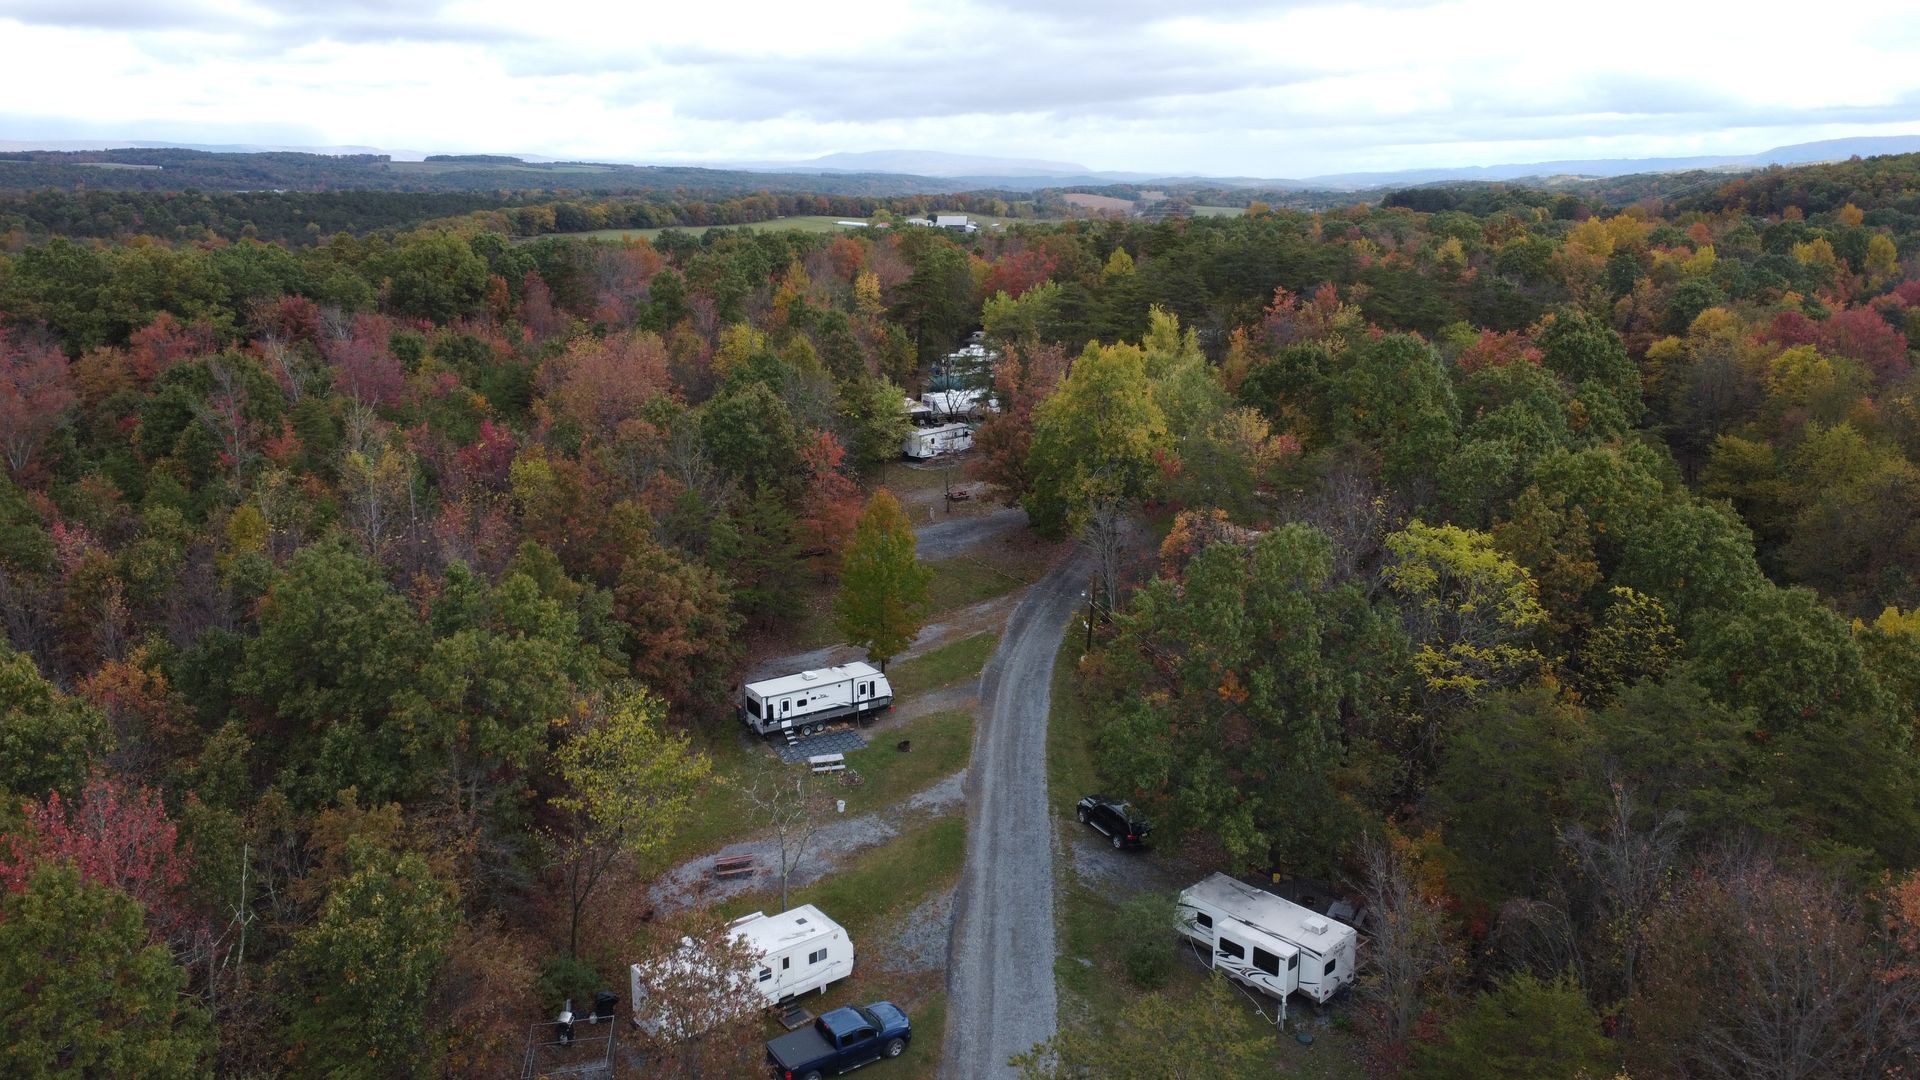 An aerial view of a rv park in the middle of a forest.